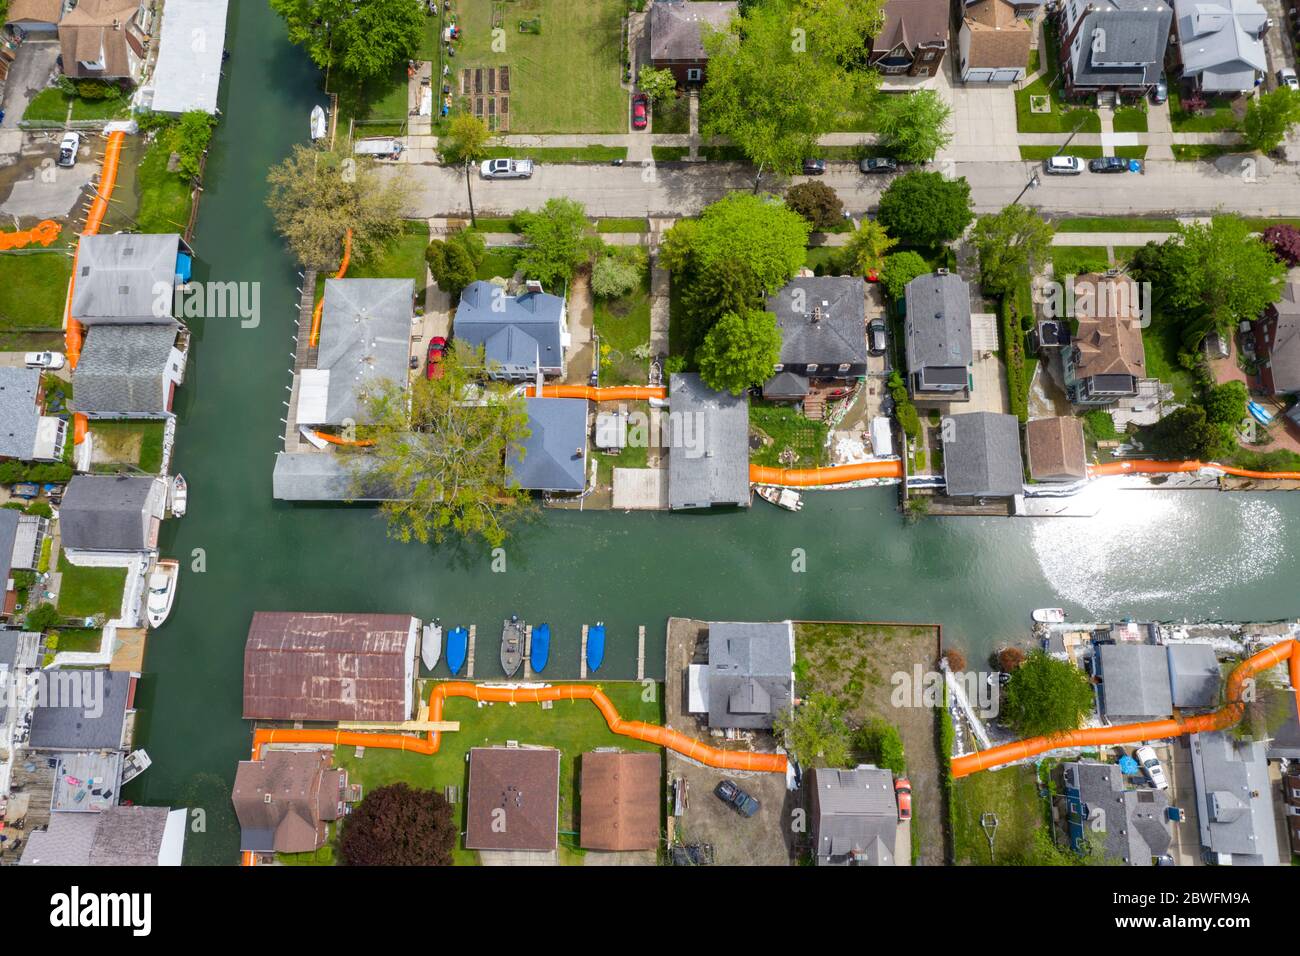 Detroit, Michigan - The city has installed orange flood control barriers around the canals on the city's east side to protect homes from flooding expe Stock Photo